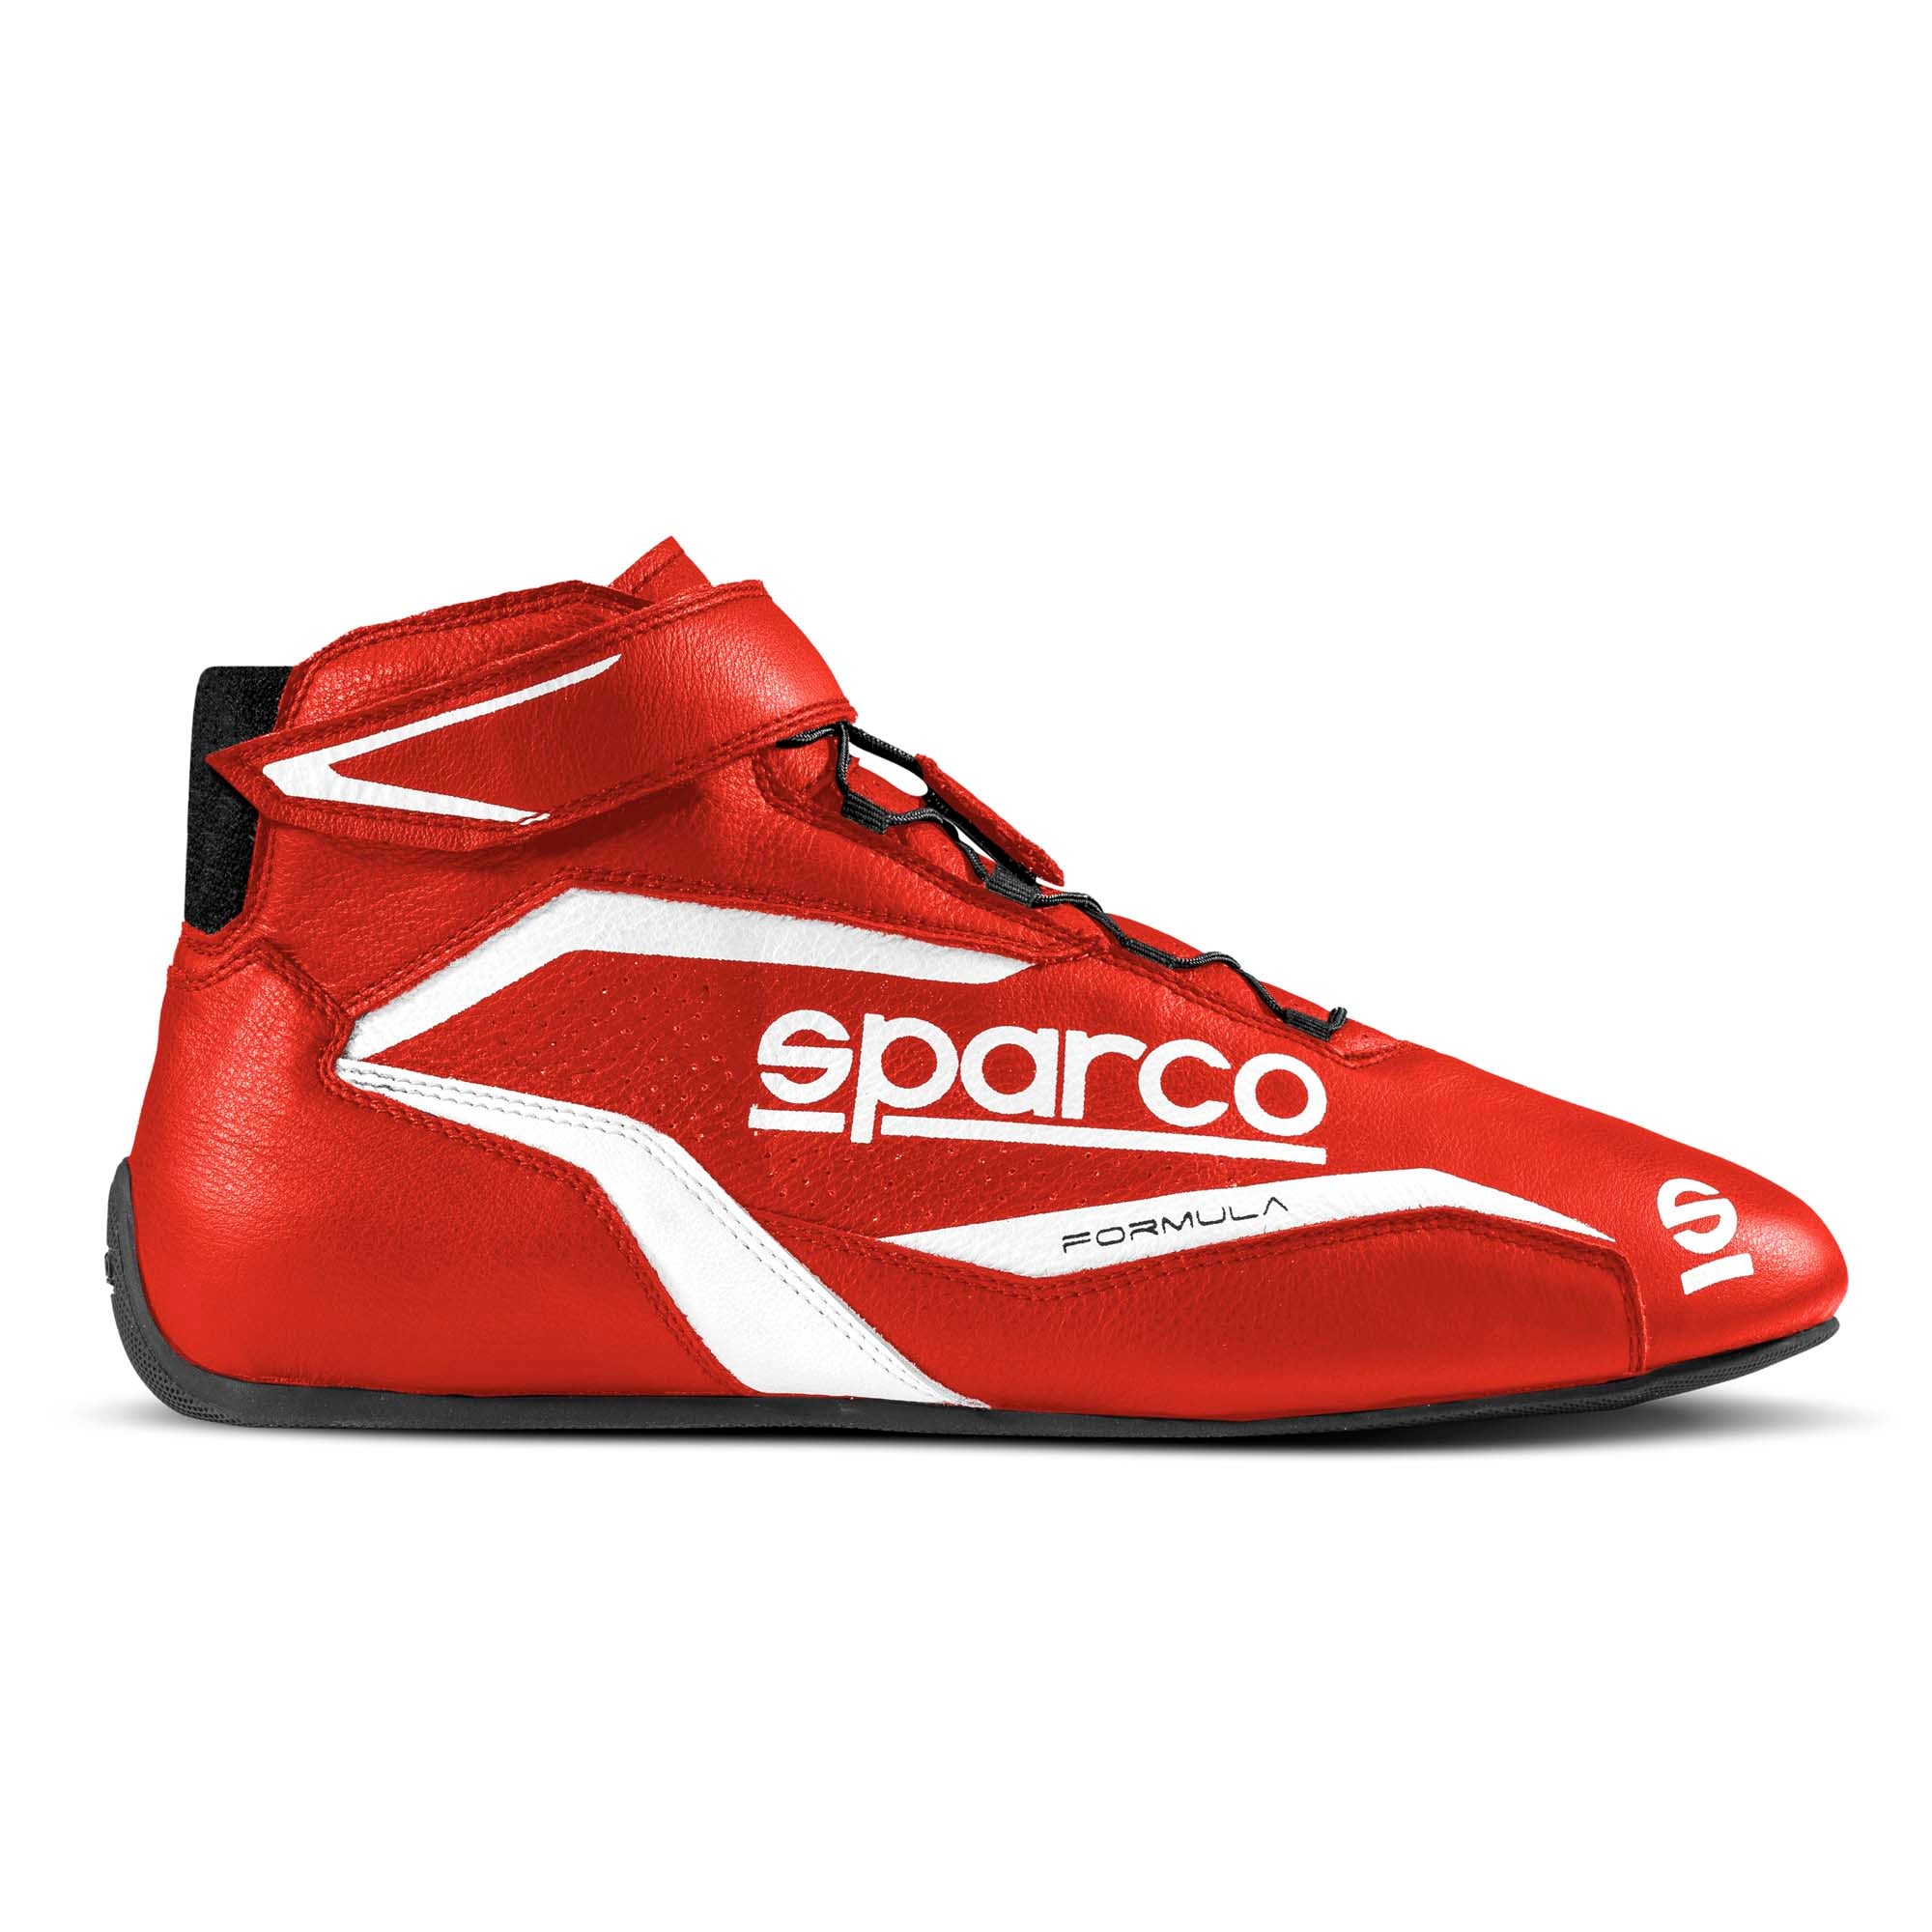 Sparco Formula Racing Shoes - Red/White